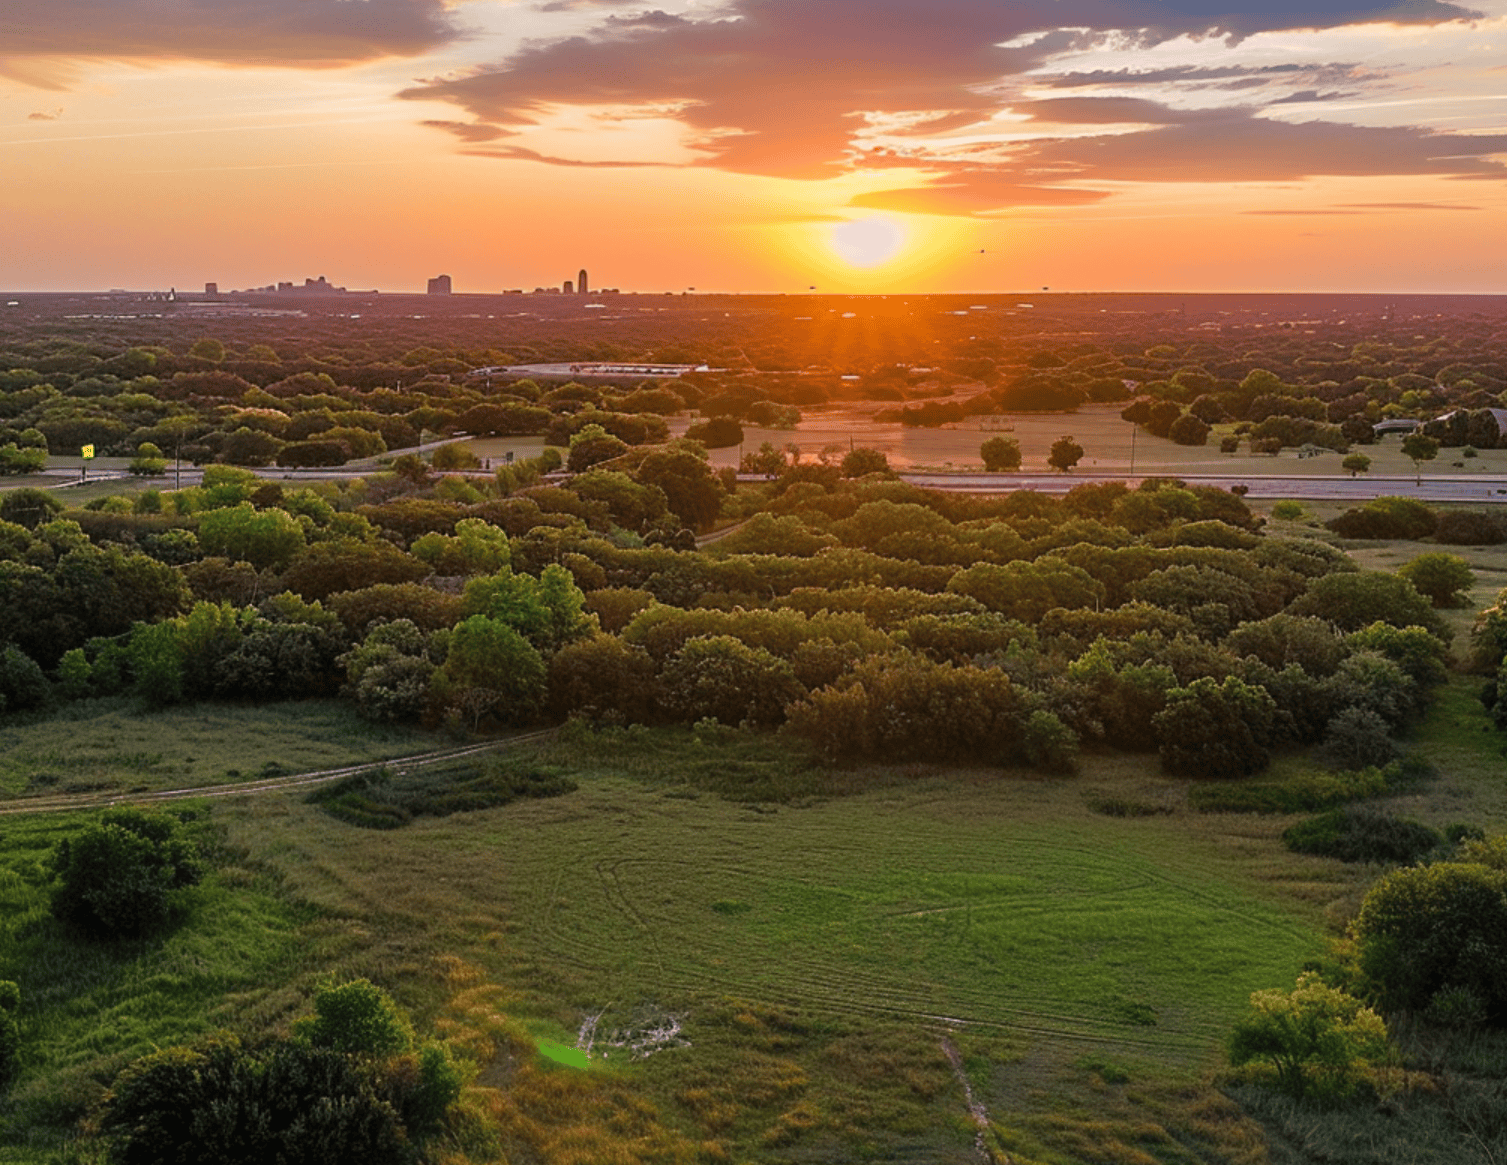 How To Sell Land in Texas – The Basics You Need To Know